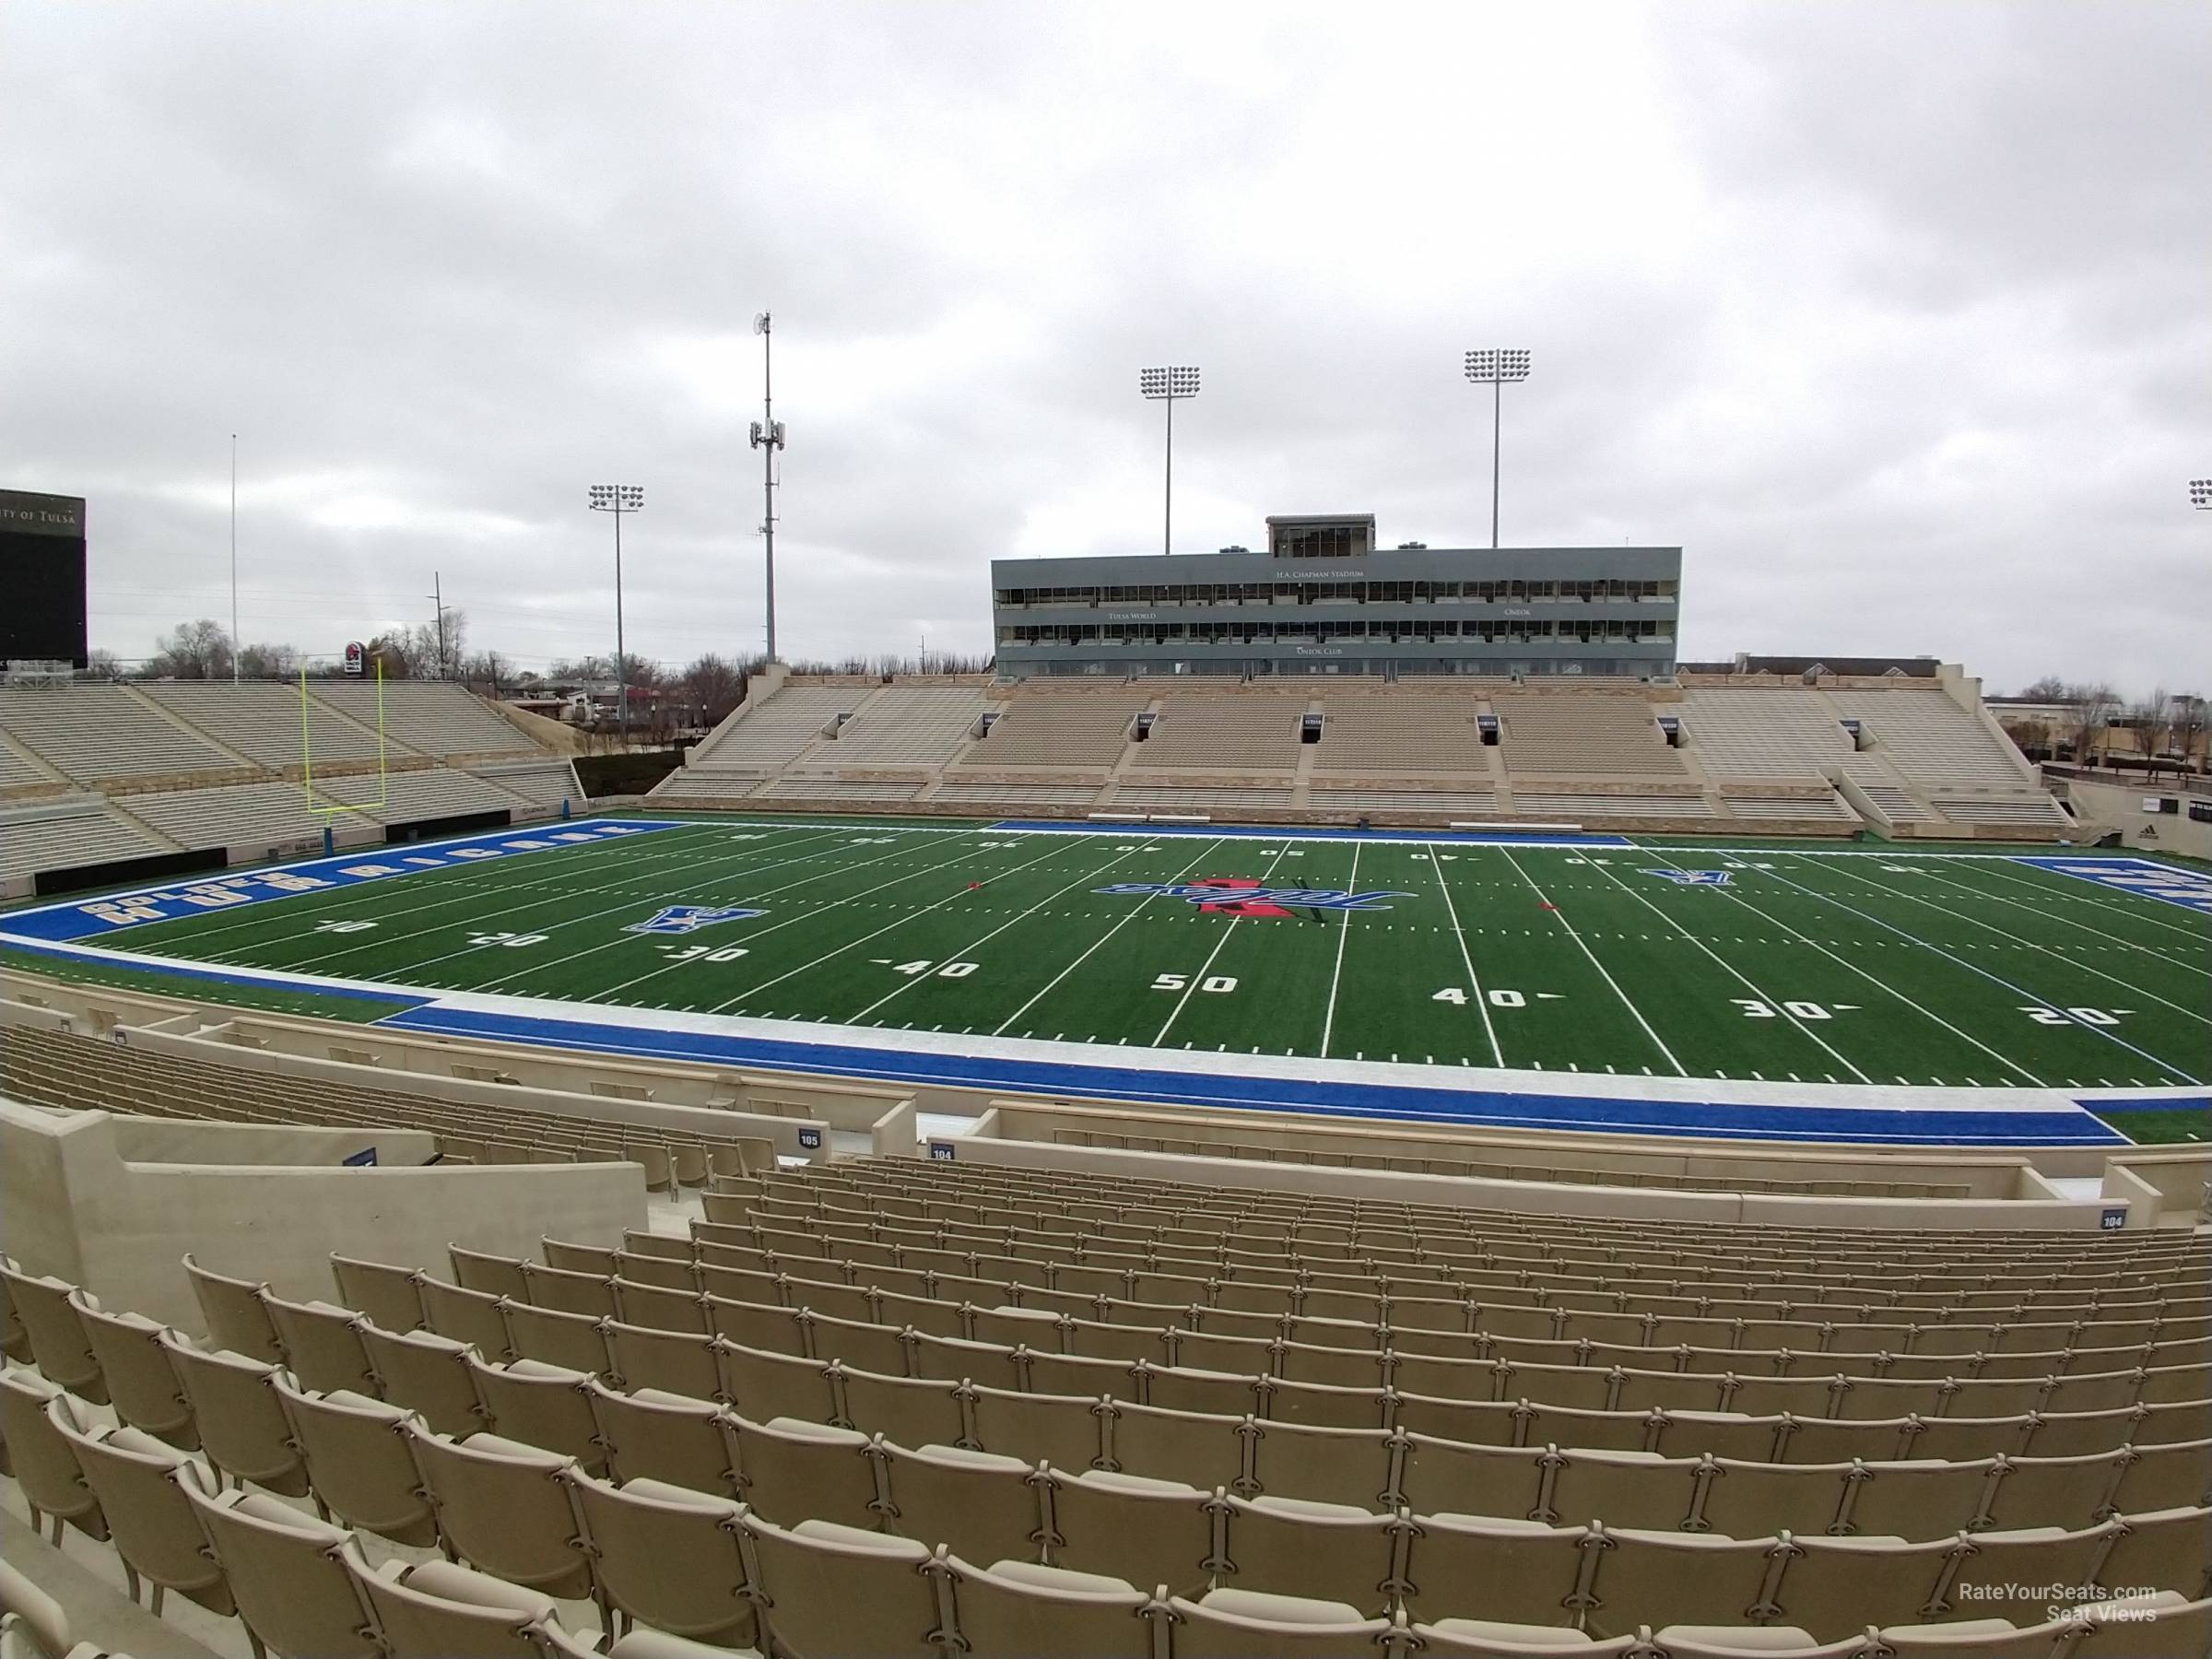 section 104, row 33 seat view  - h.a. chapman stadium